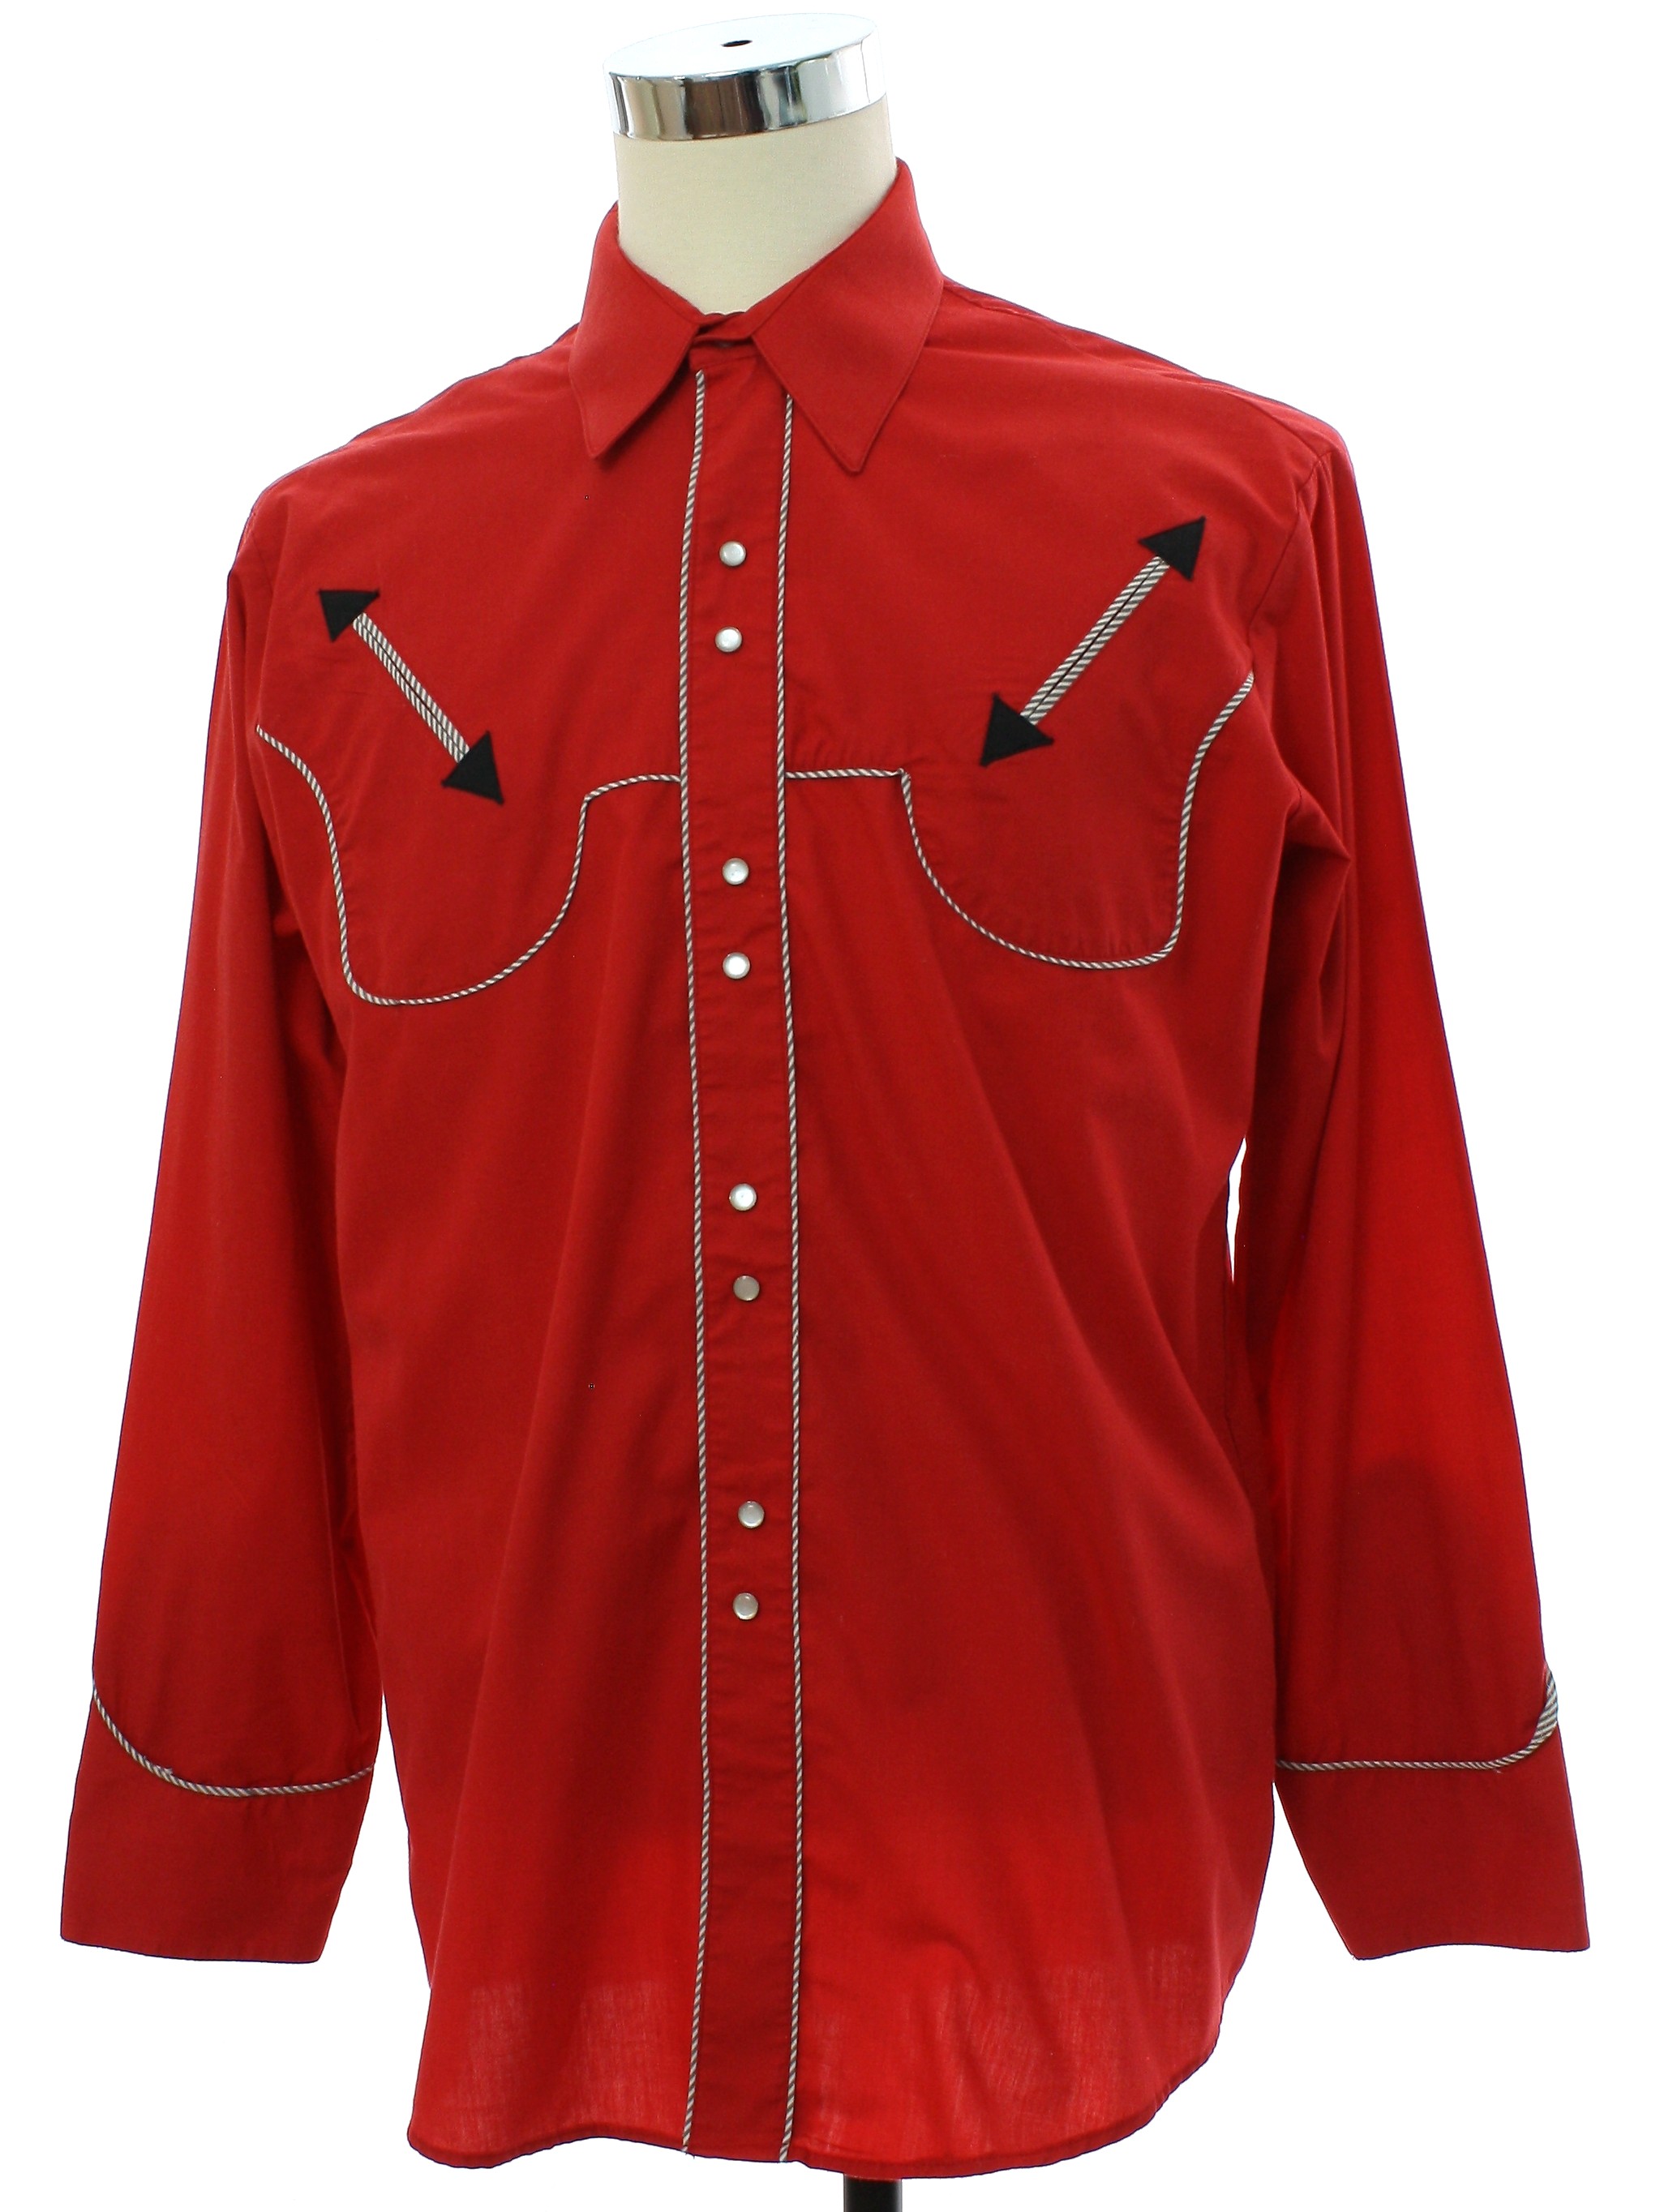 Retro 1990s Western Shirt: 90s -Custer- Mens red polyester cotton blend ...